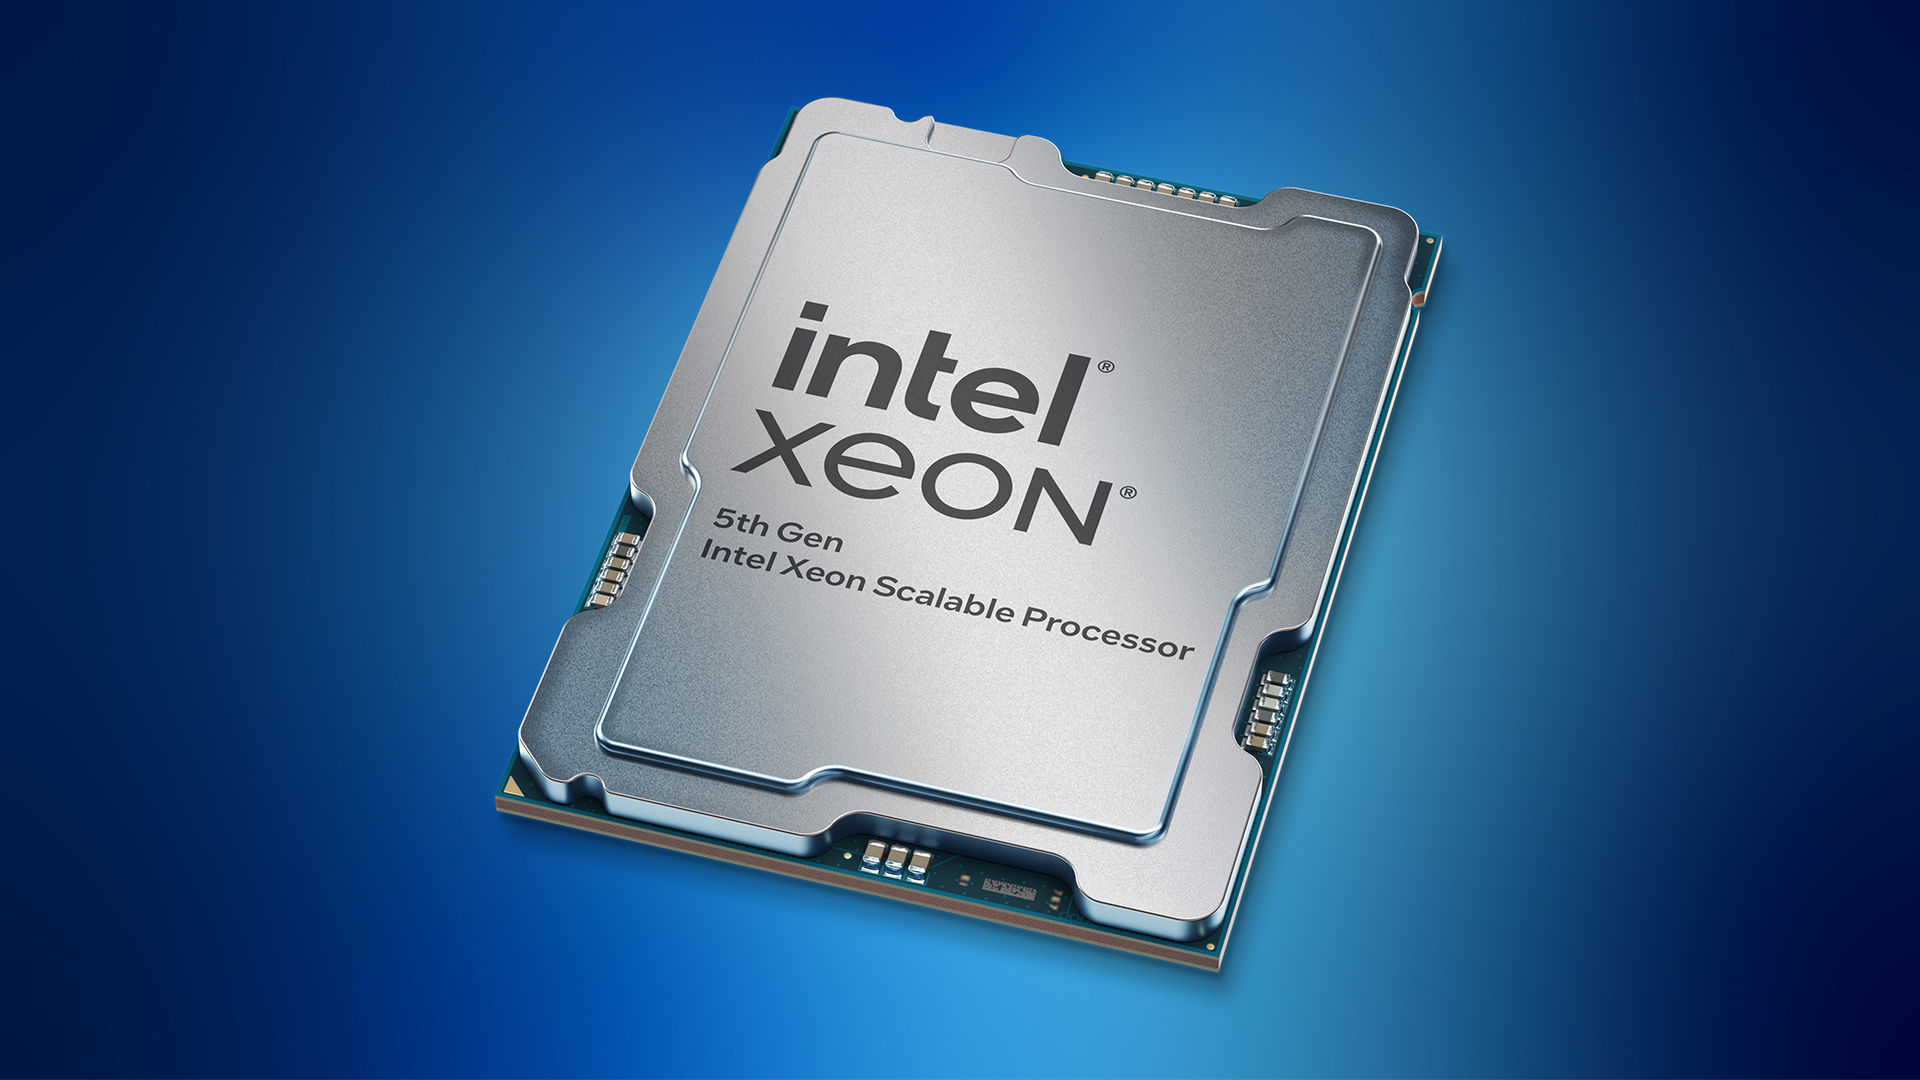 https://www.intel.com/content/dam/www/central-libraries/us/en/images/2023-11/intel-xeon-5th-gen-package-angle-right-front-bg-rwd.jpg